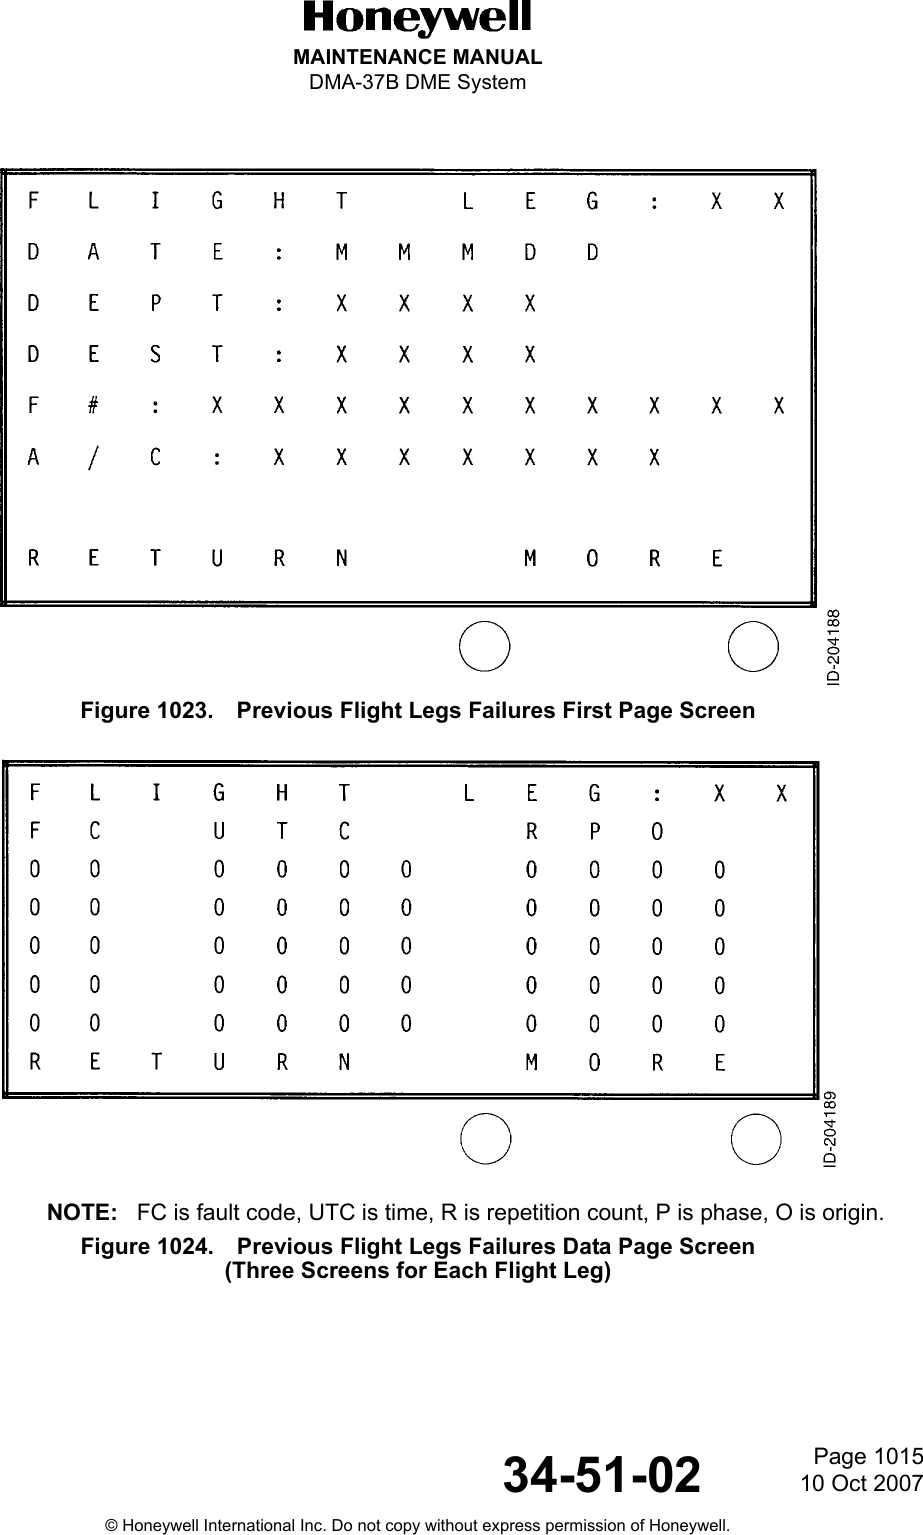 Page 101510 Oct 200734-51-02MAINTENANCE MANUALDMA-37B DME System© Honeywell International Inc. Do not copy without express permission of Honeywell.Figure 1023. Previous Flight Legs Failures First Page ScreenNOTE: FC is fault code, UTC is time, R is repetition count, P is phase, O is origin.Figure 1024. Previous Flight Legs Failures Data Page Screen(Three Screens for Each Flight Leg)